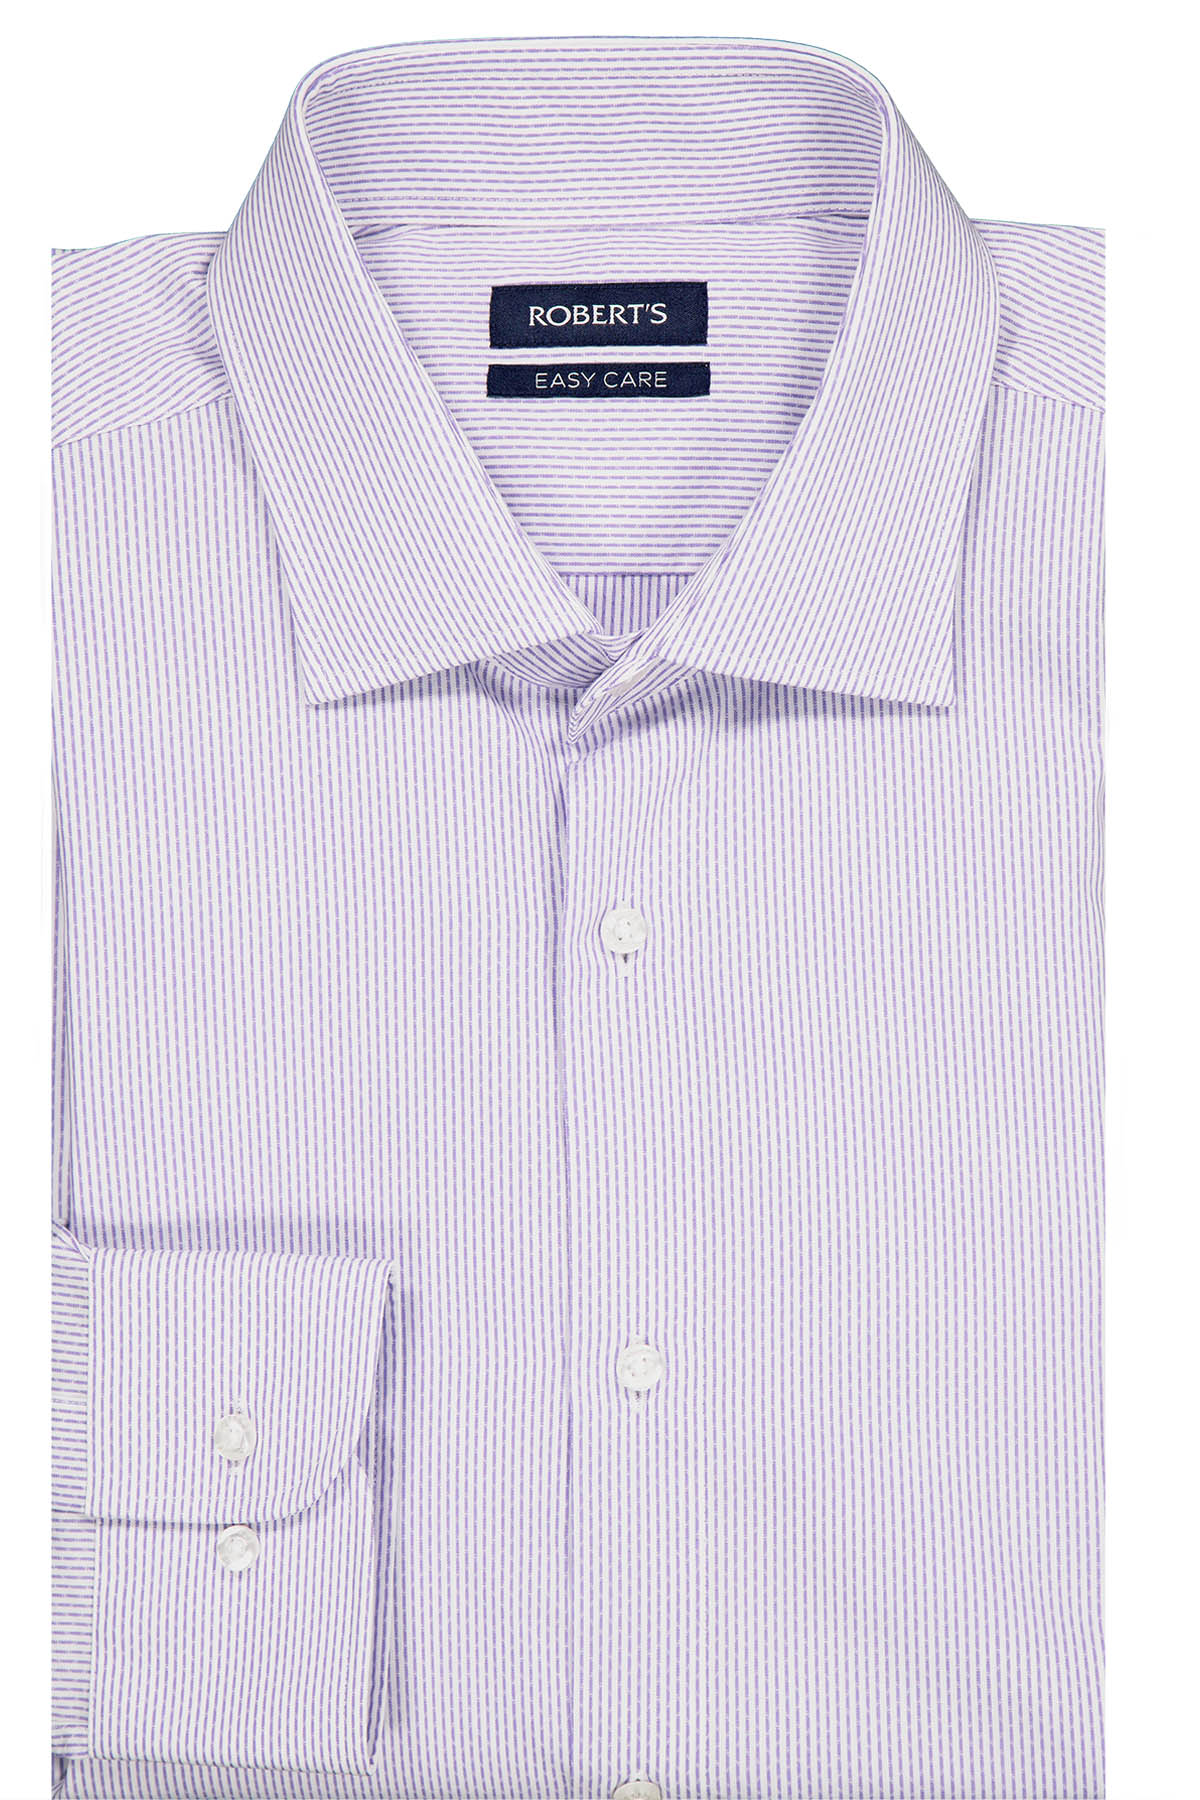 Camisa Formal Roberts Easy Care Contemporary Fit Color Blanco